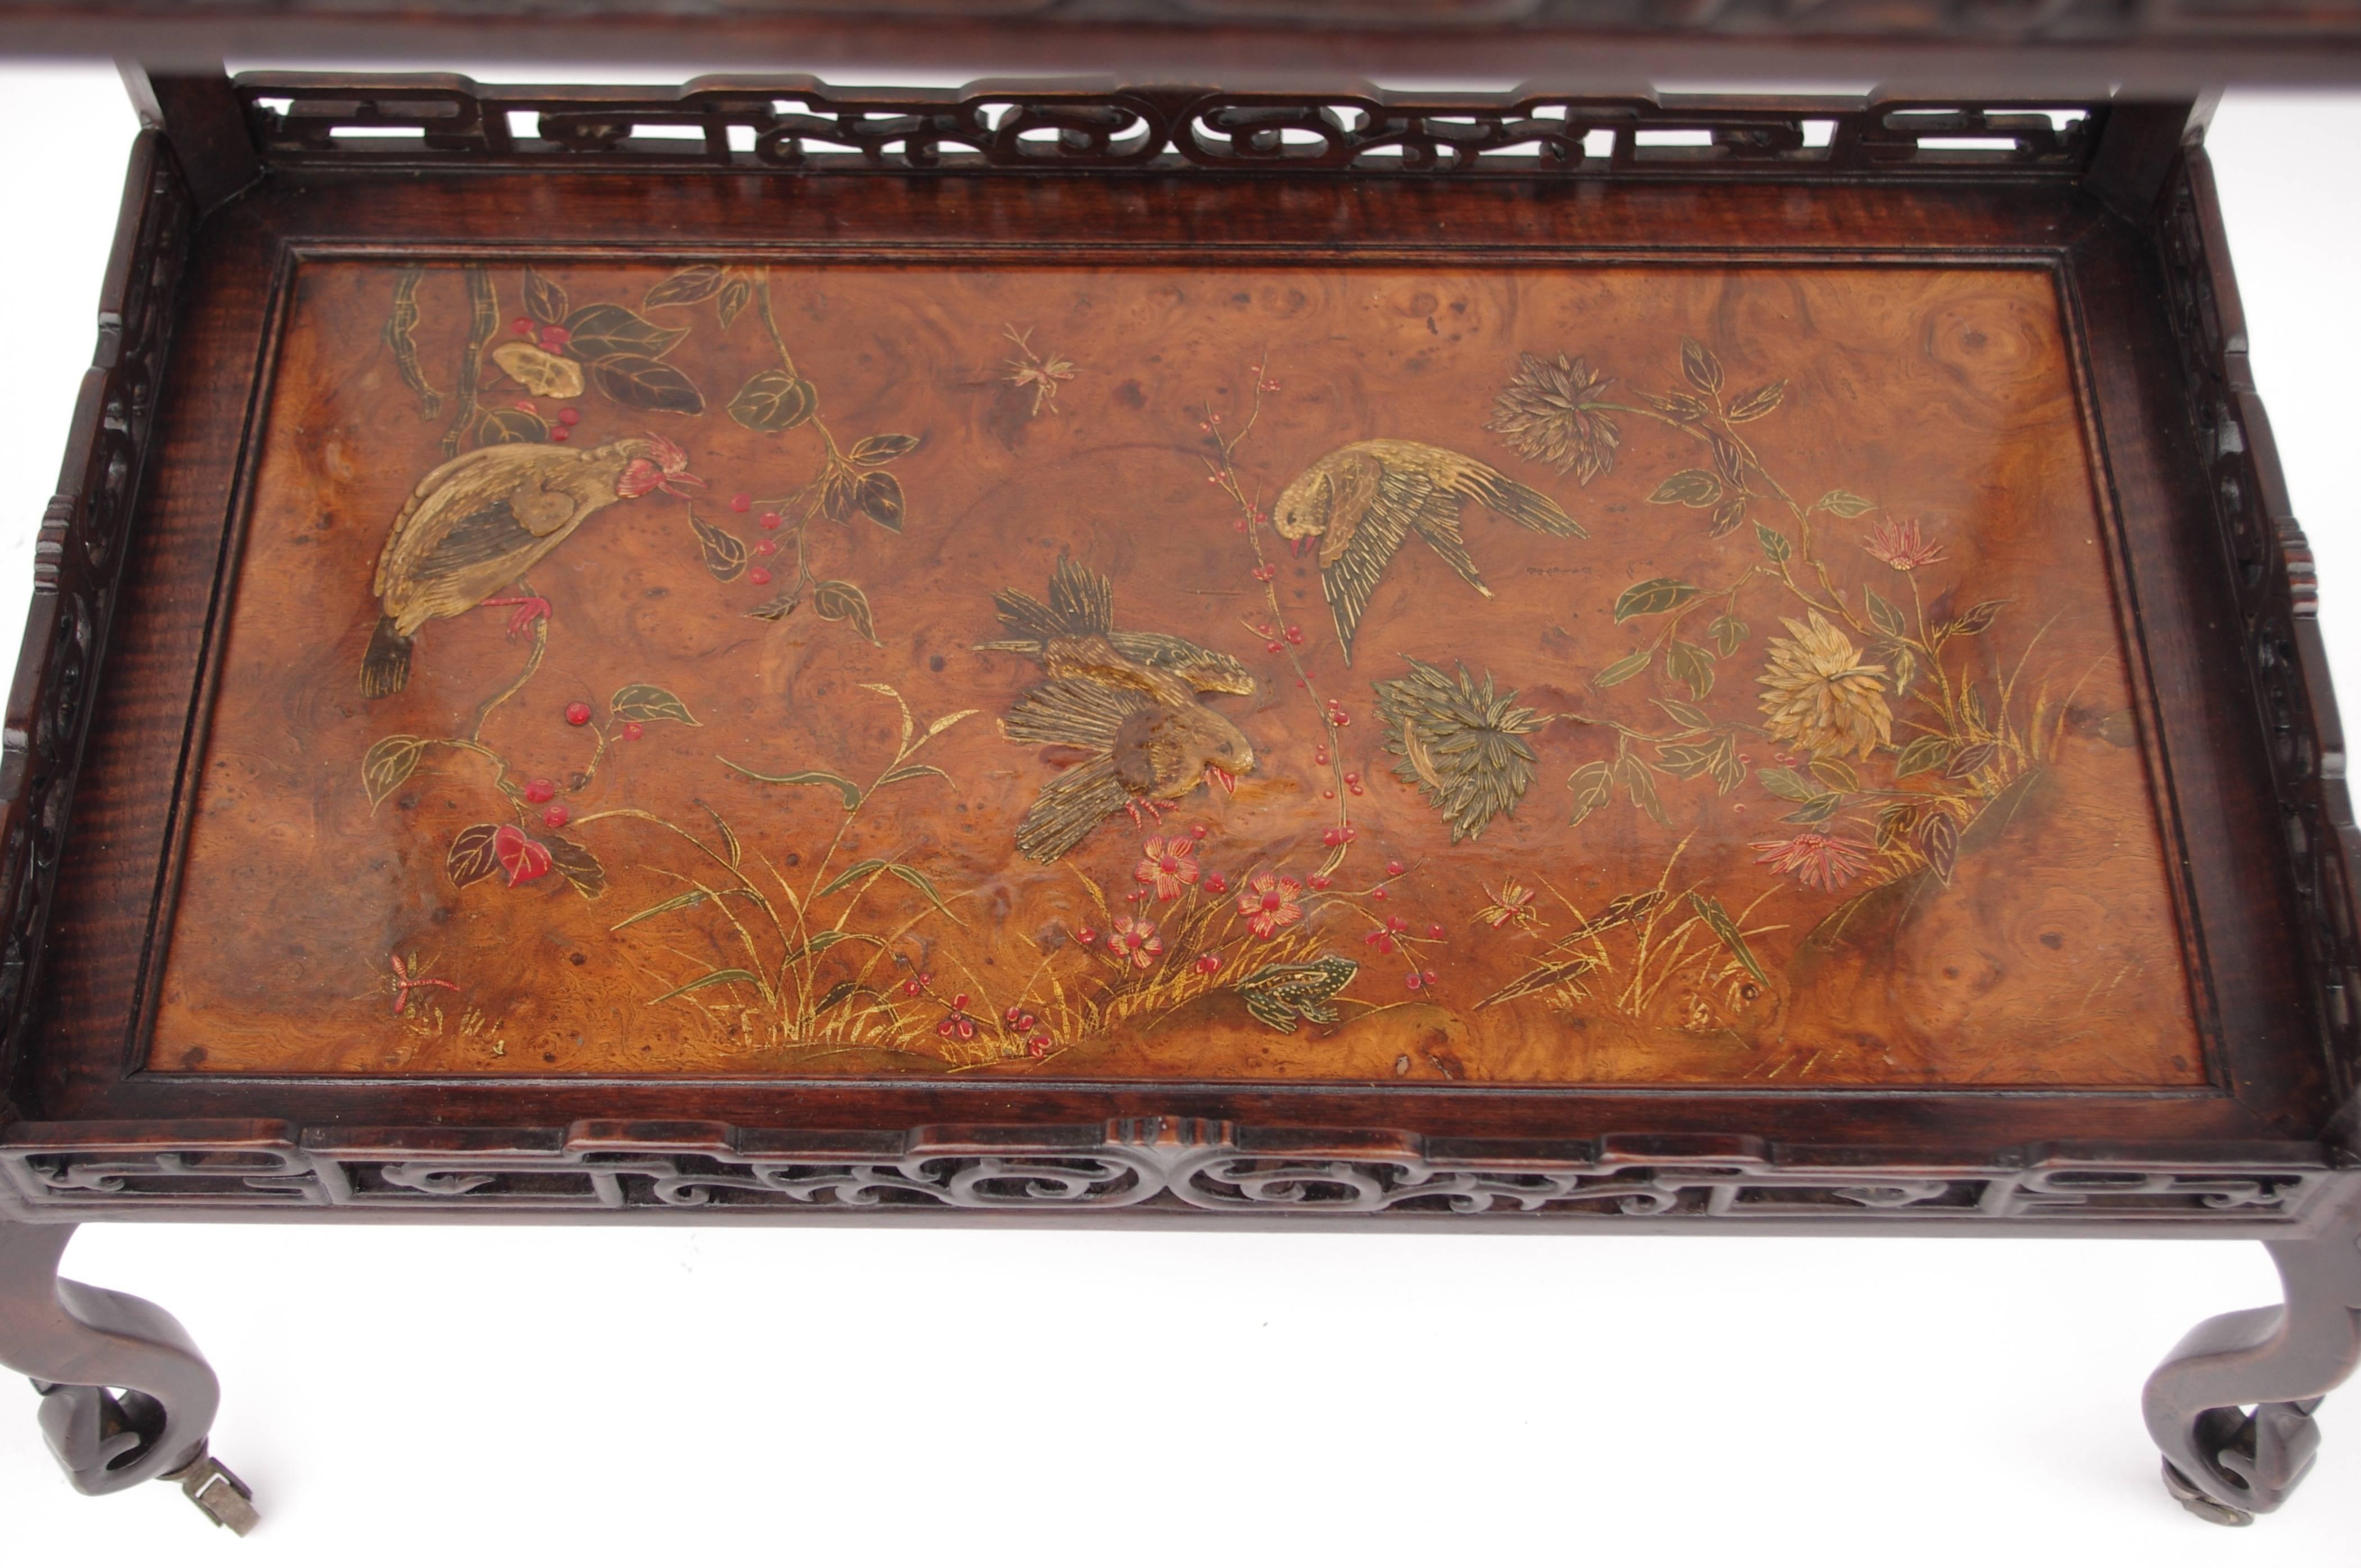 Two tops.
Sculpted and openwork wood.
On wheels.
Chinese lacquer decor.
Napoleon III period.